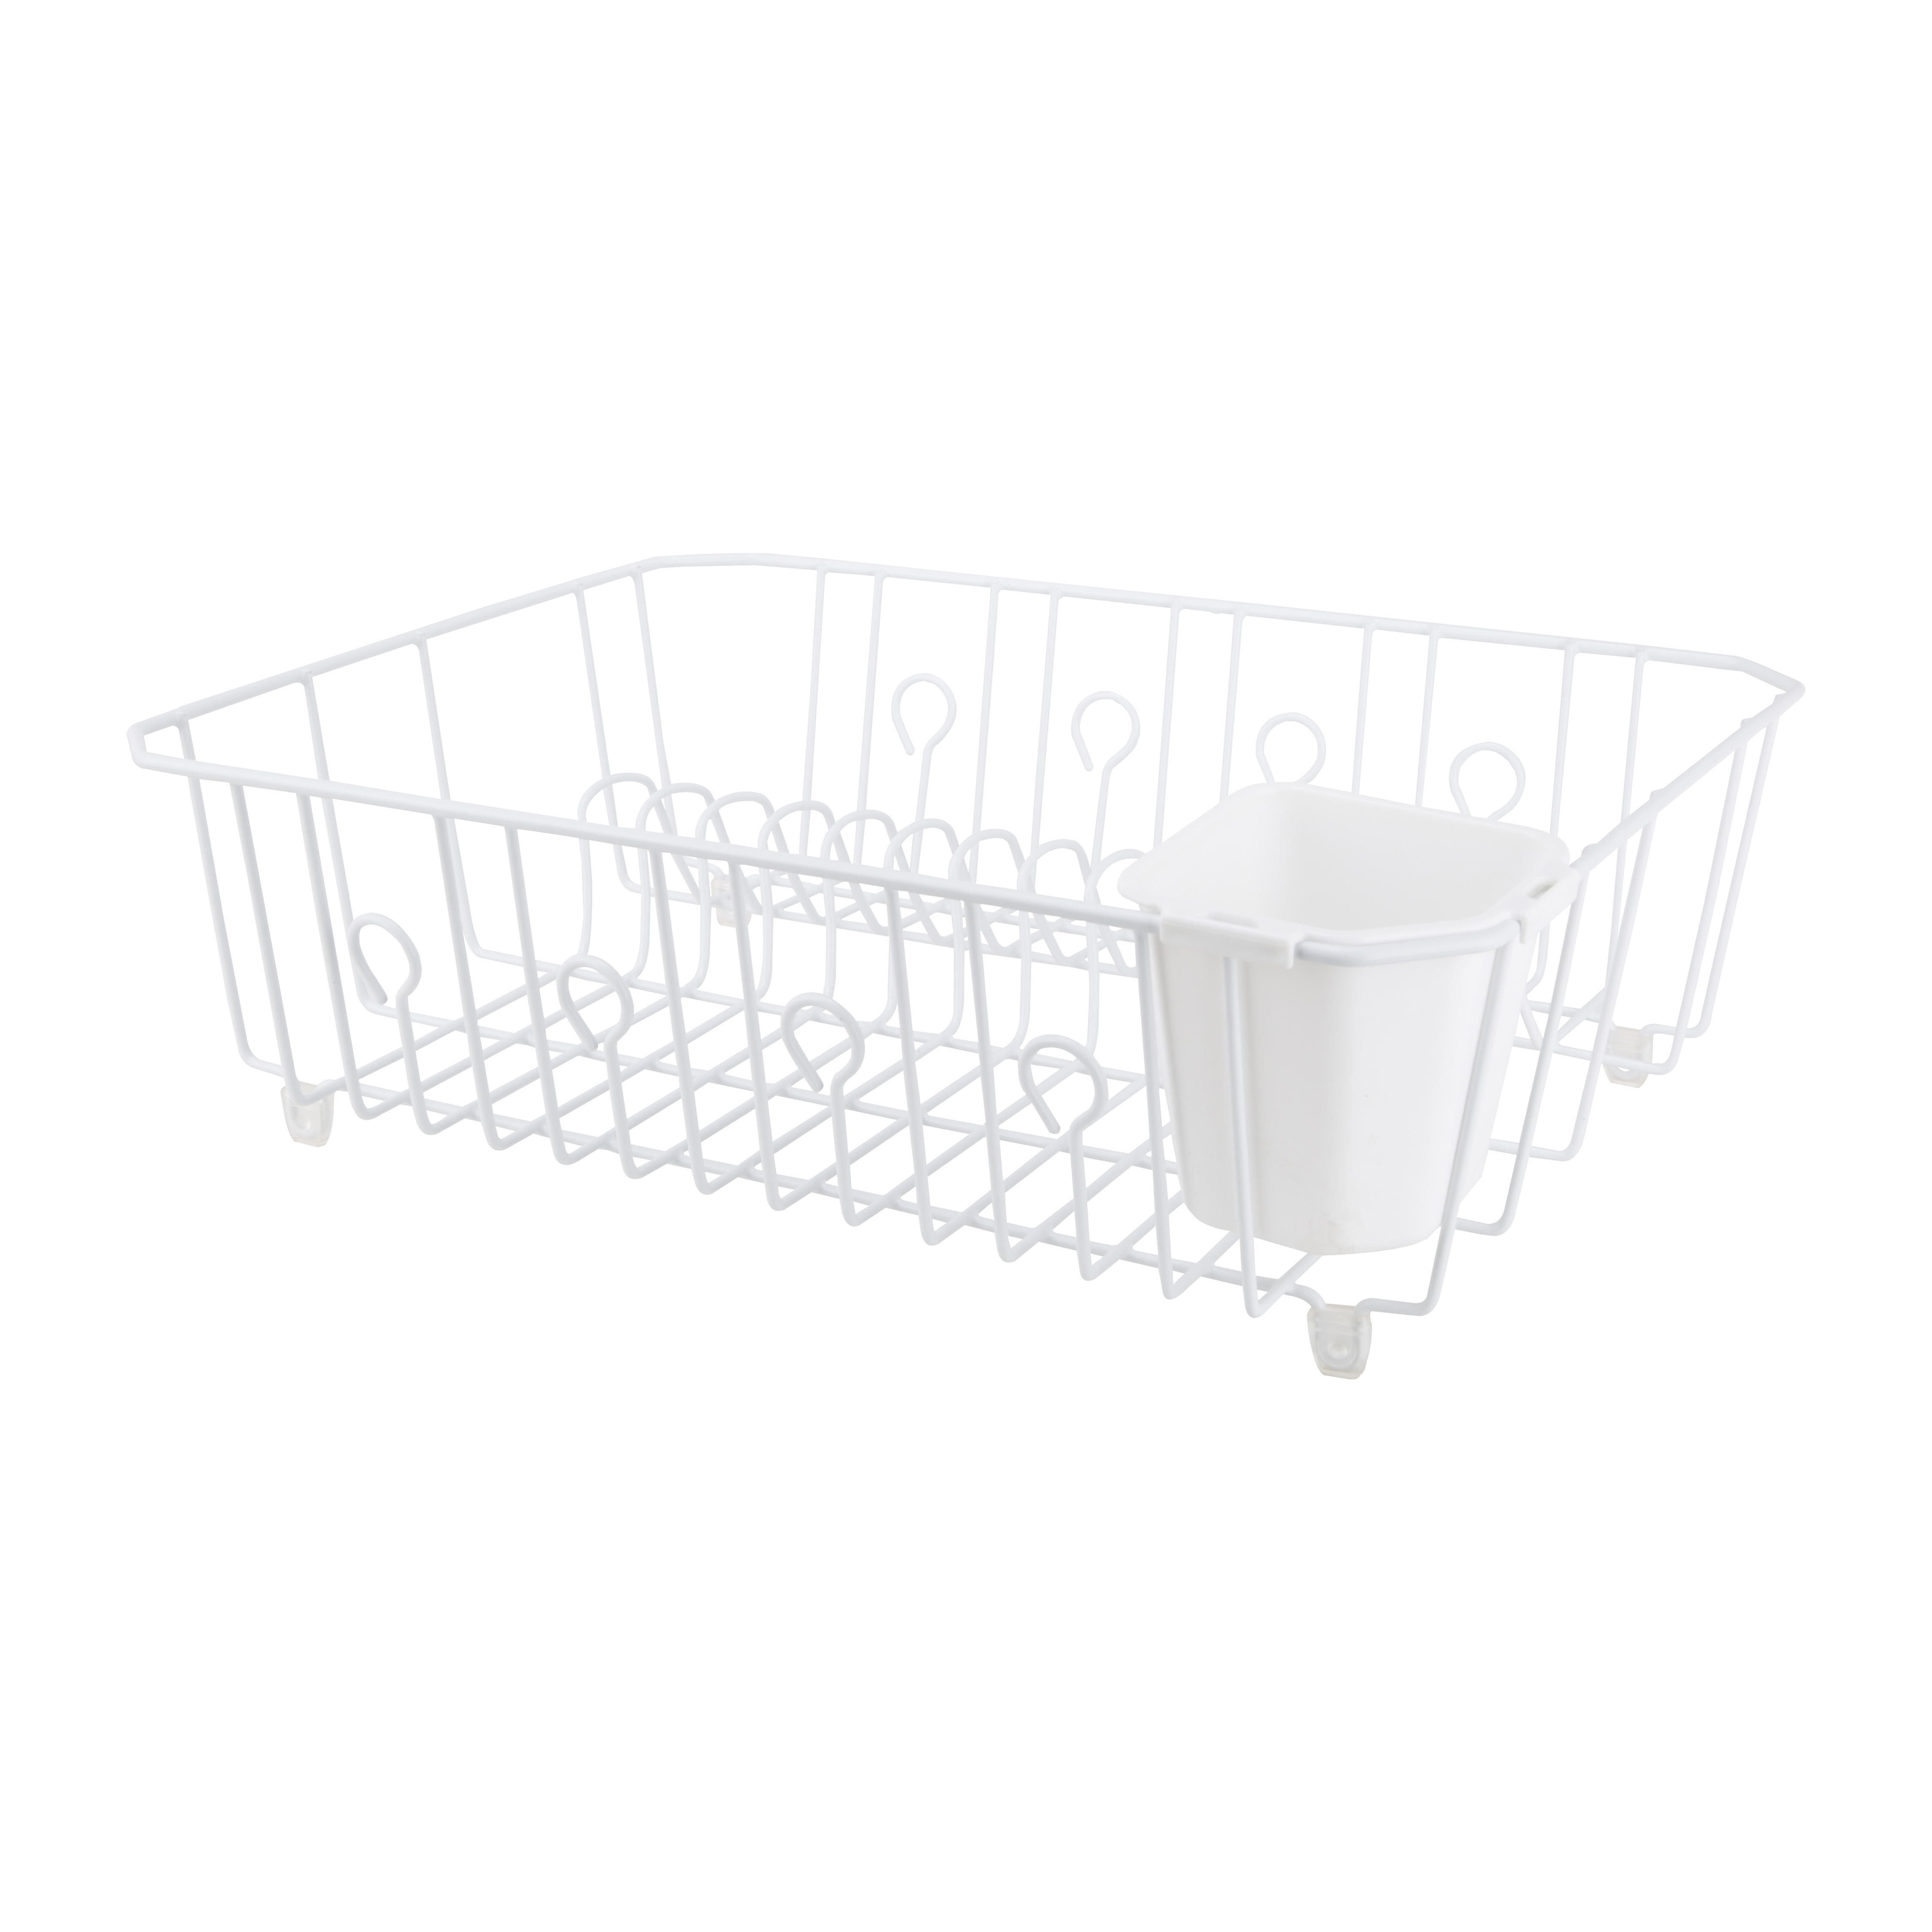 Dish Drainer with Cutlery Basket, 20 lb Capacity, 18 in L, 13-1/2 in W, 5-1/2 in H, Steel